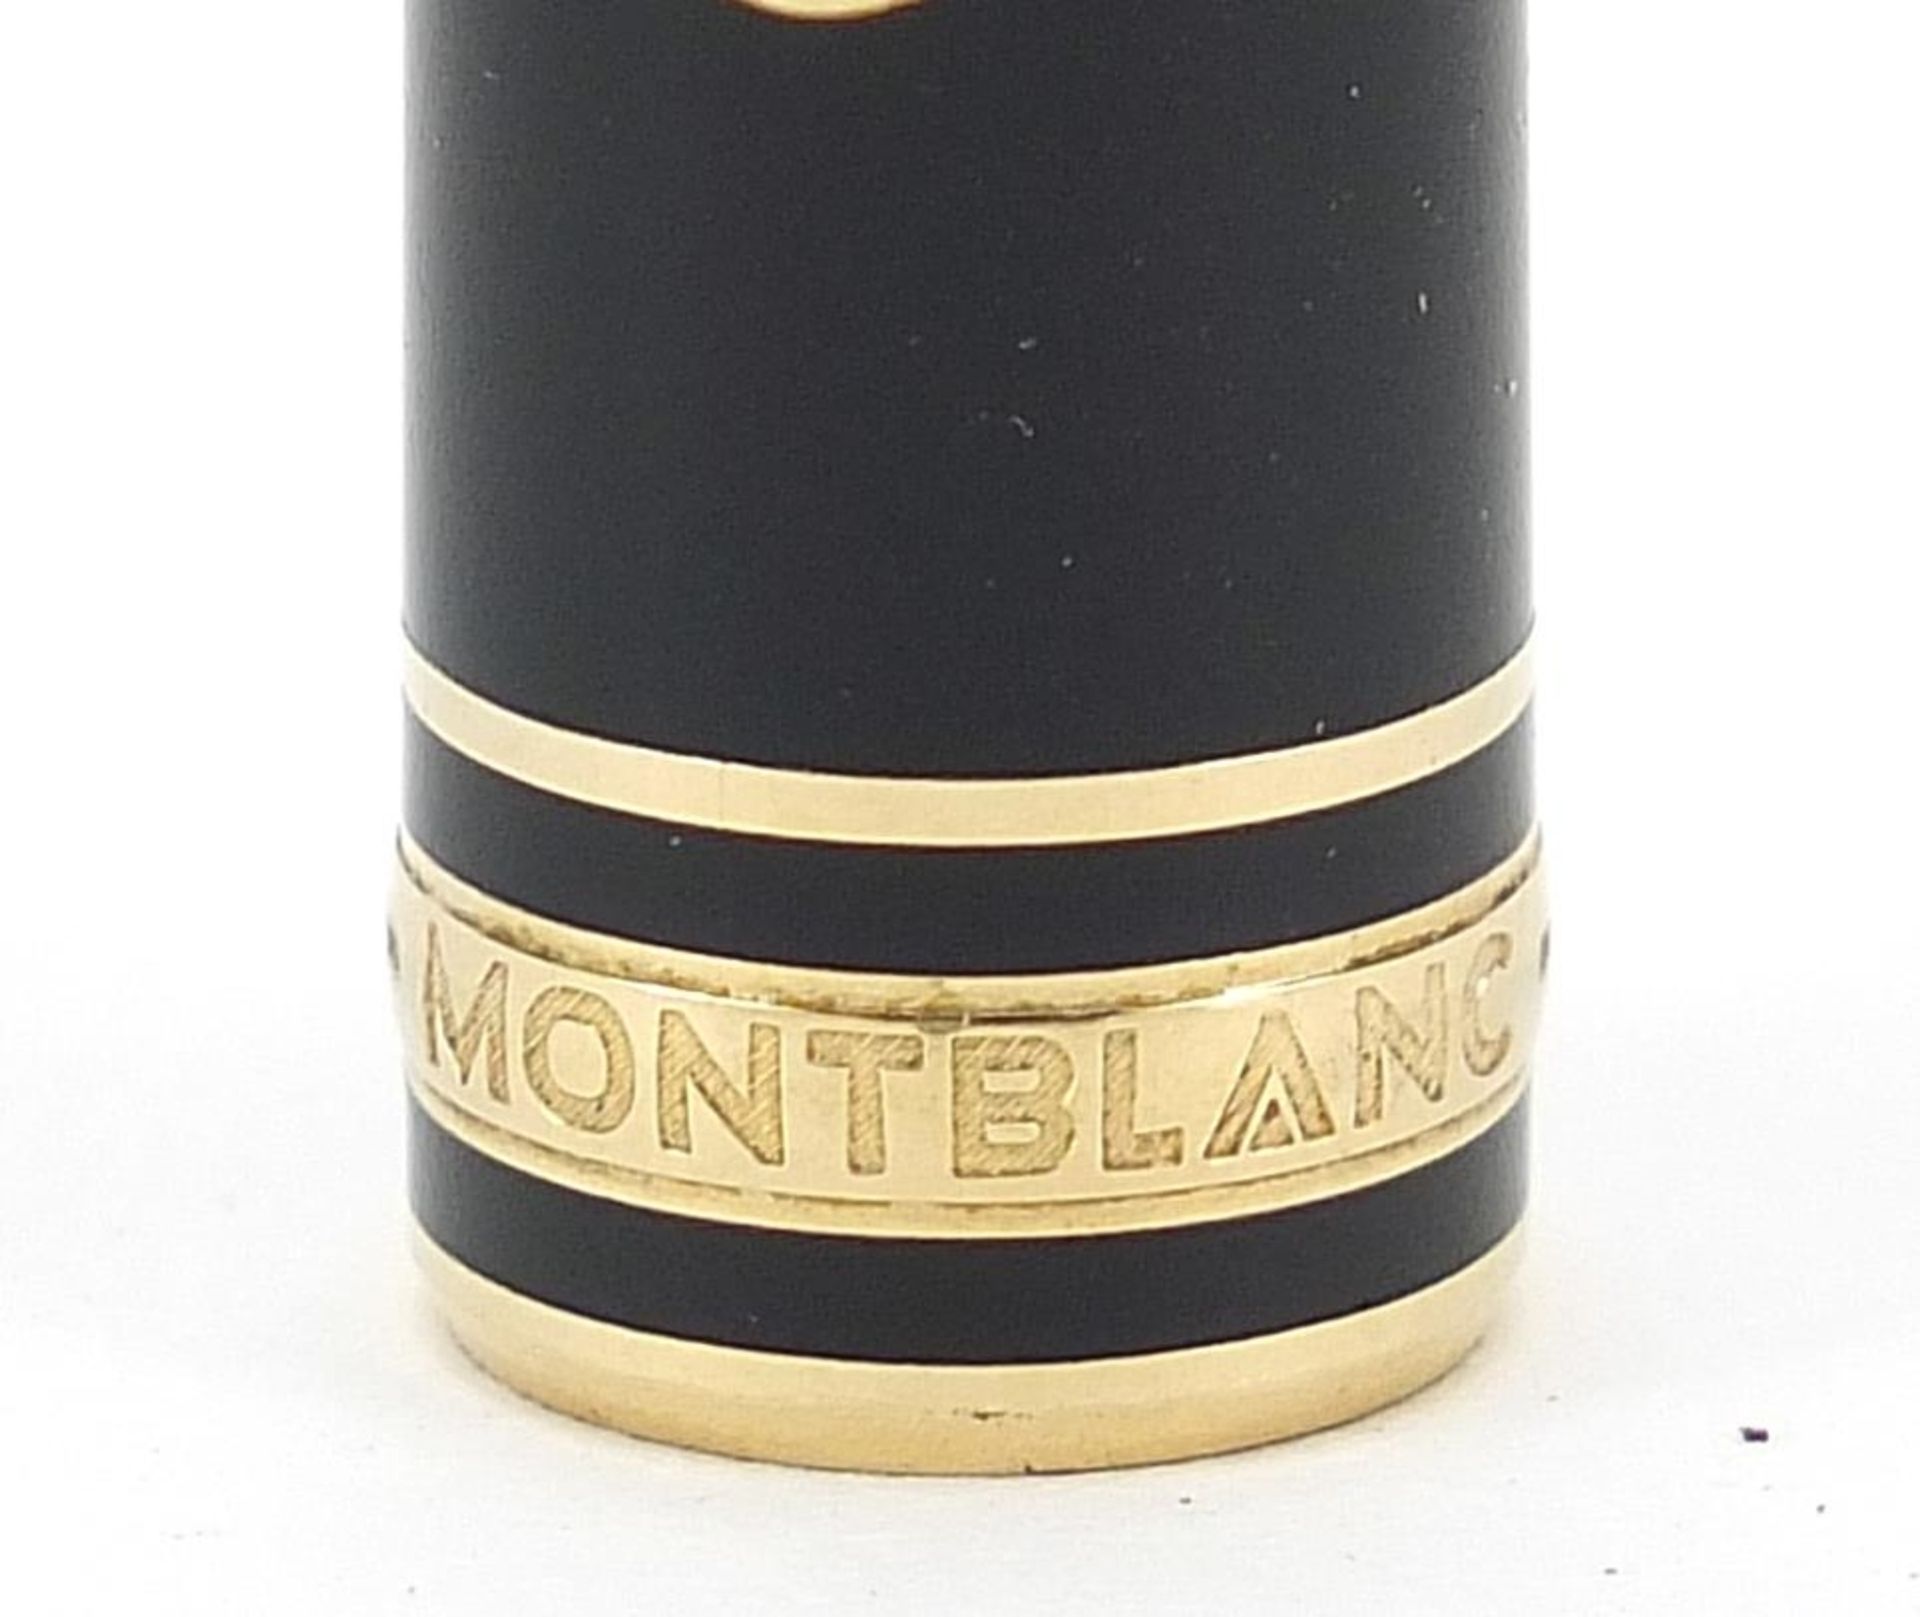 Montblanc Meisterstuck fountain pen with 14k gold nib numbered 4810, serial number PY1046185 - Image 3 of 5